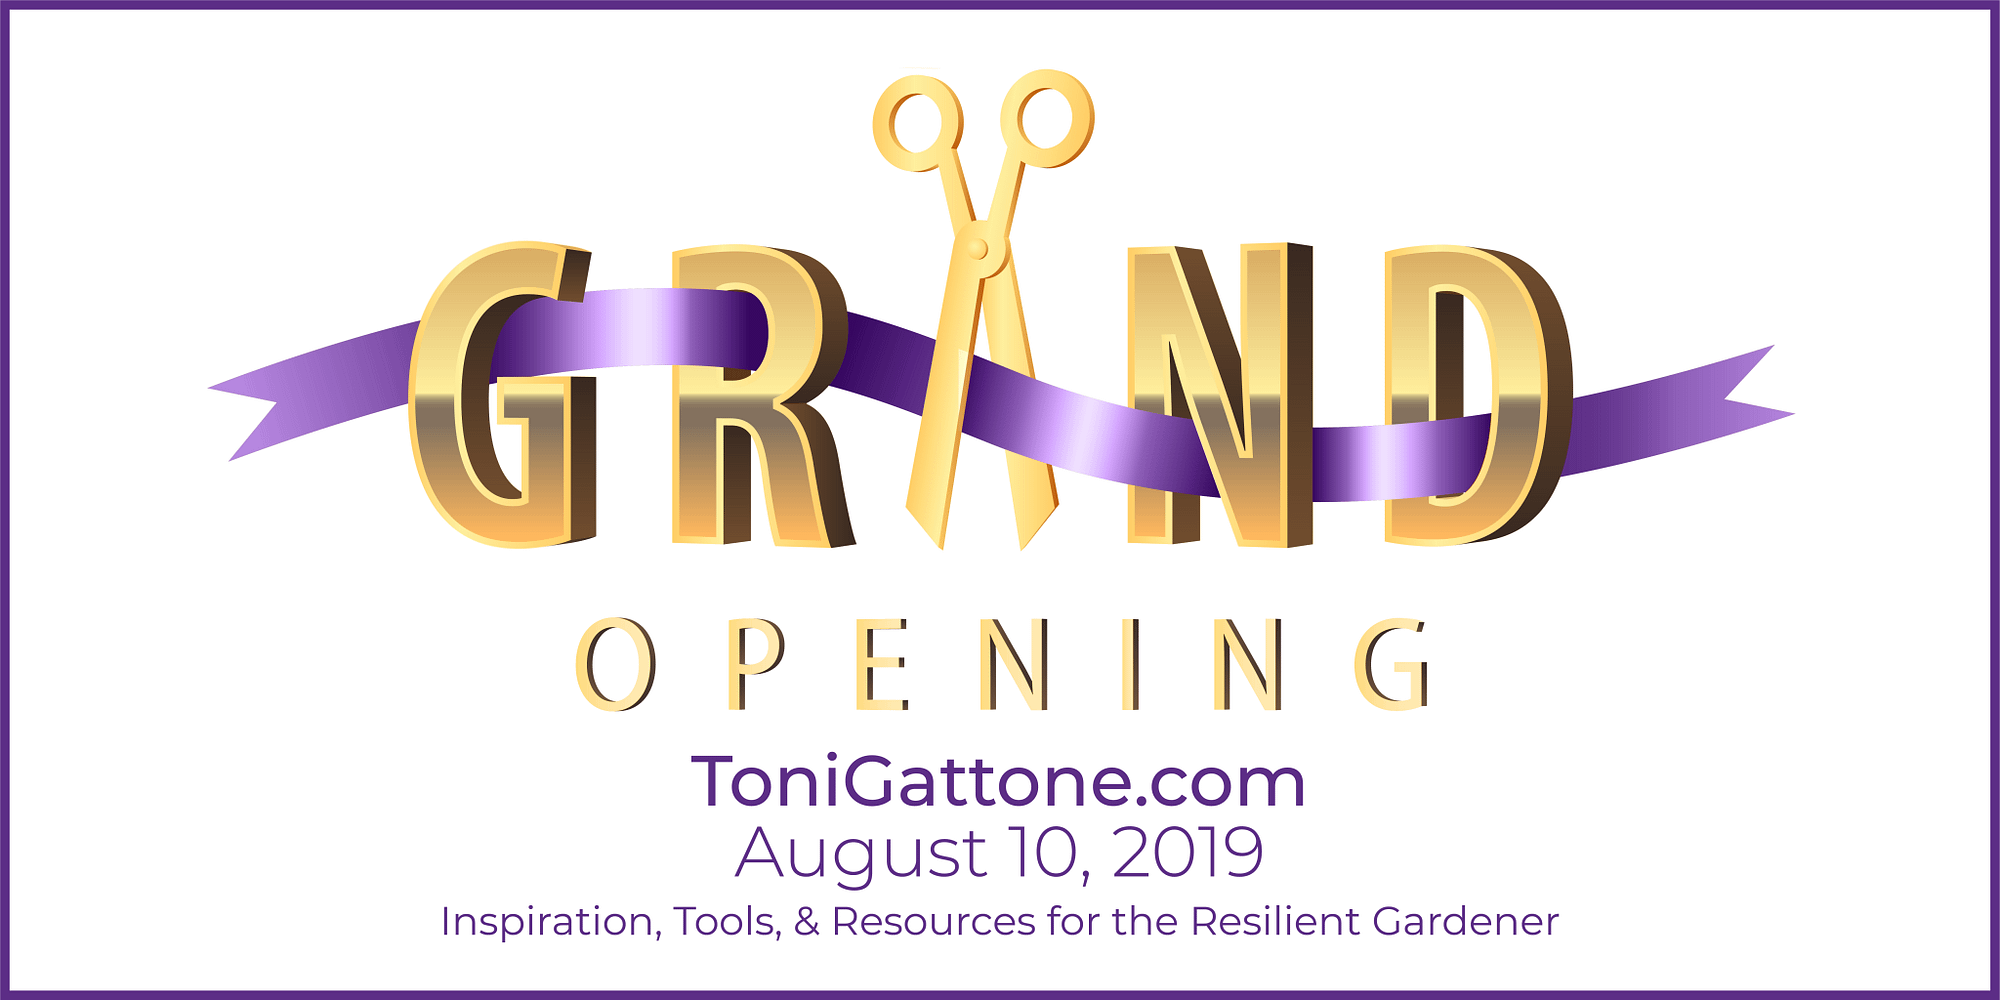 Virtual ribbon cutting and Grand Opening for Toni.Gattone.com , featuring inspiration, tools and resources for the resilient gardener.